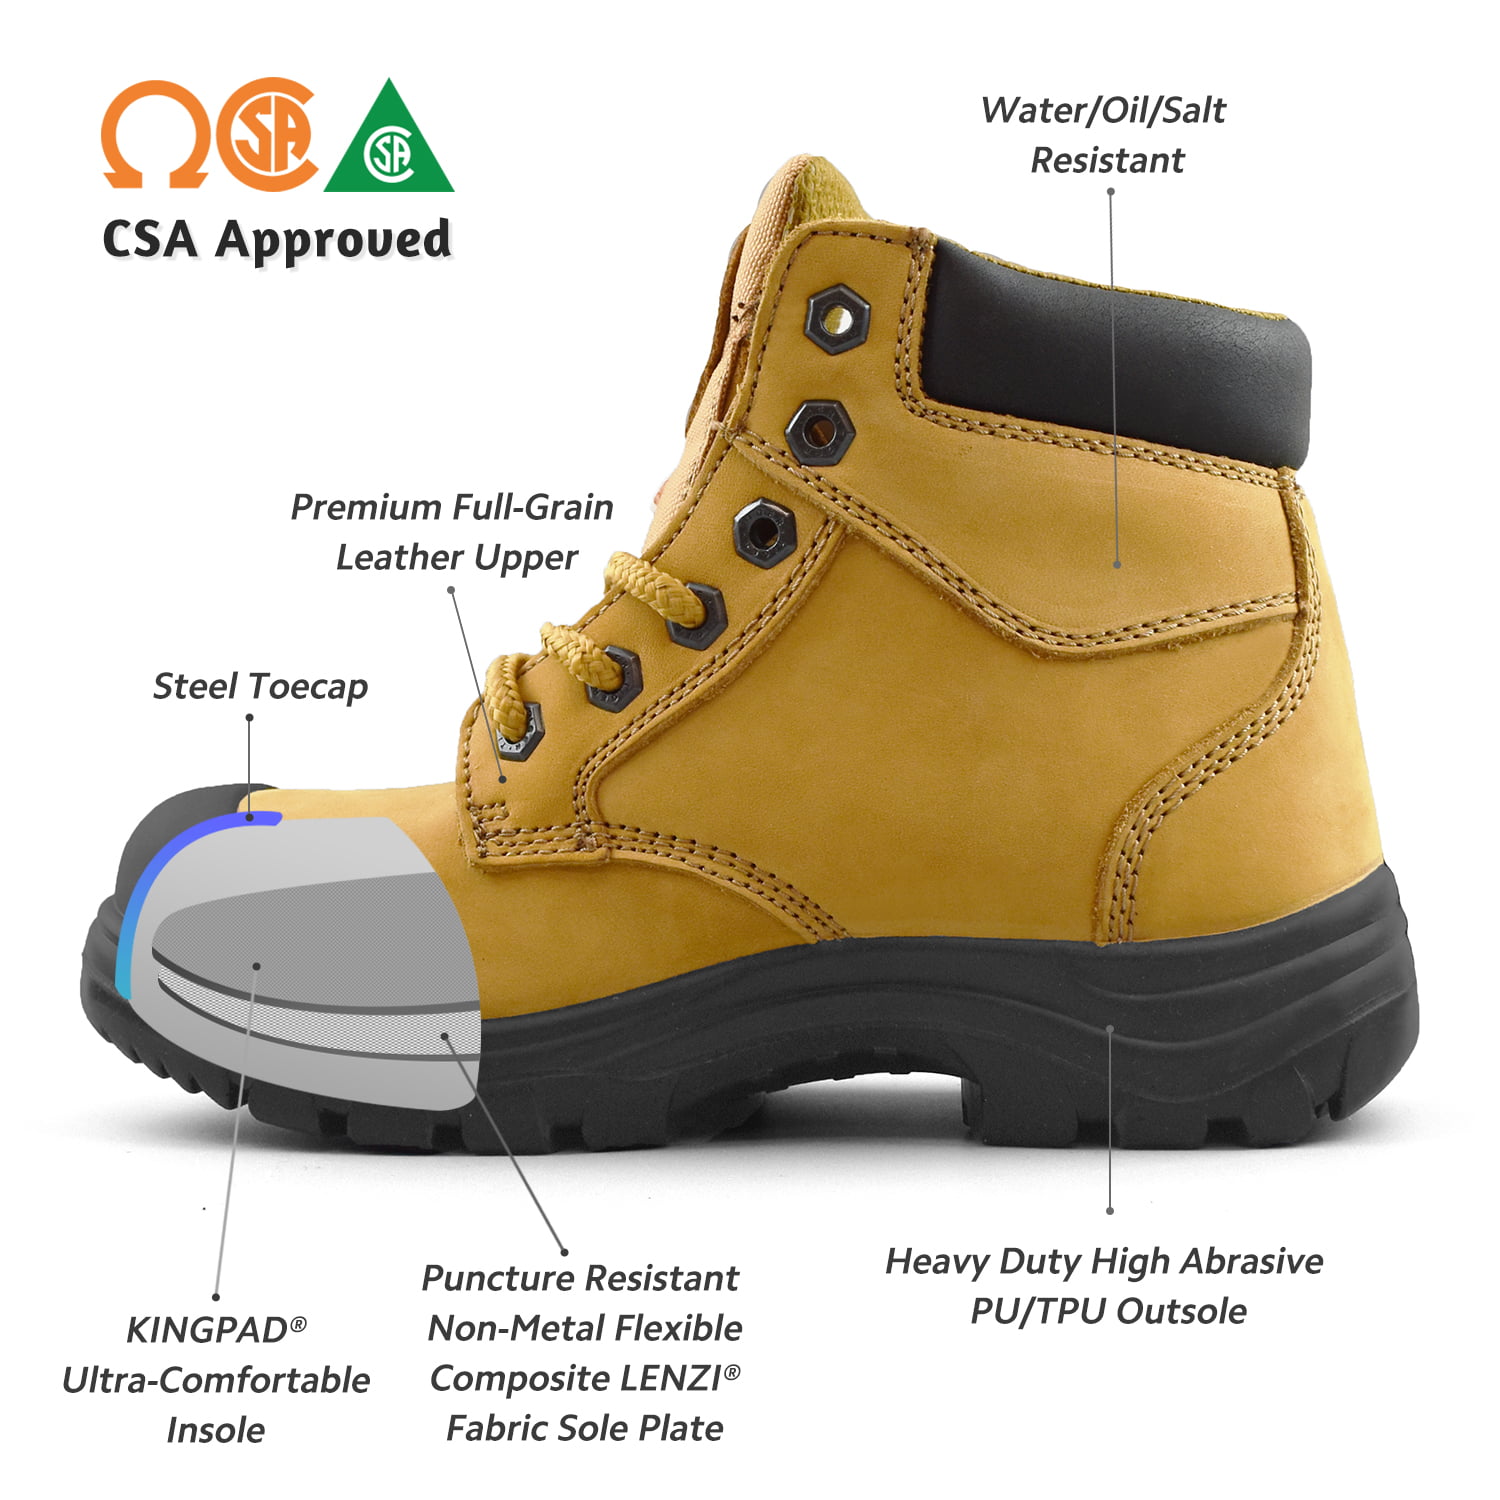 csa approved safety shoes near me